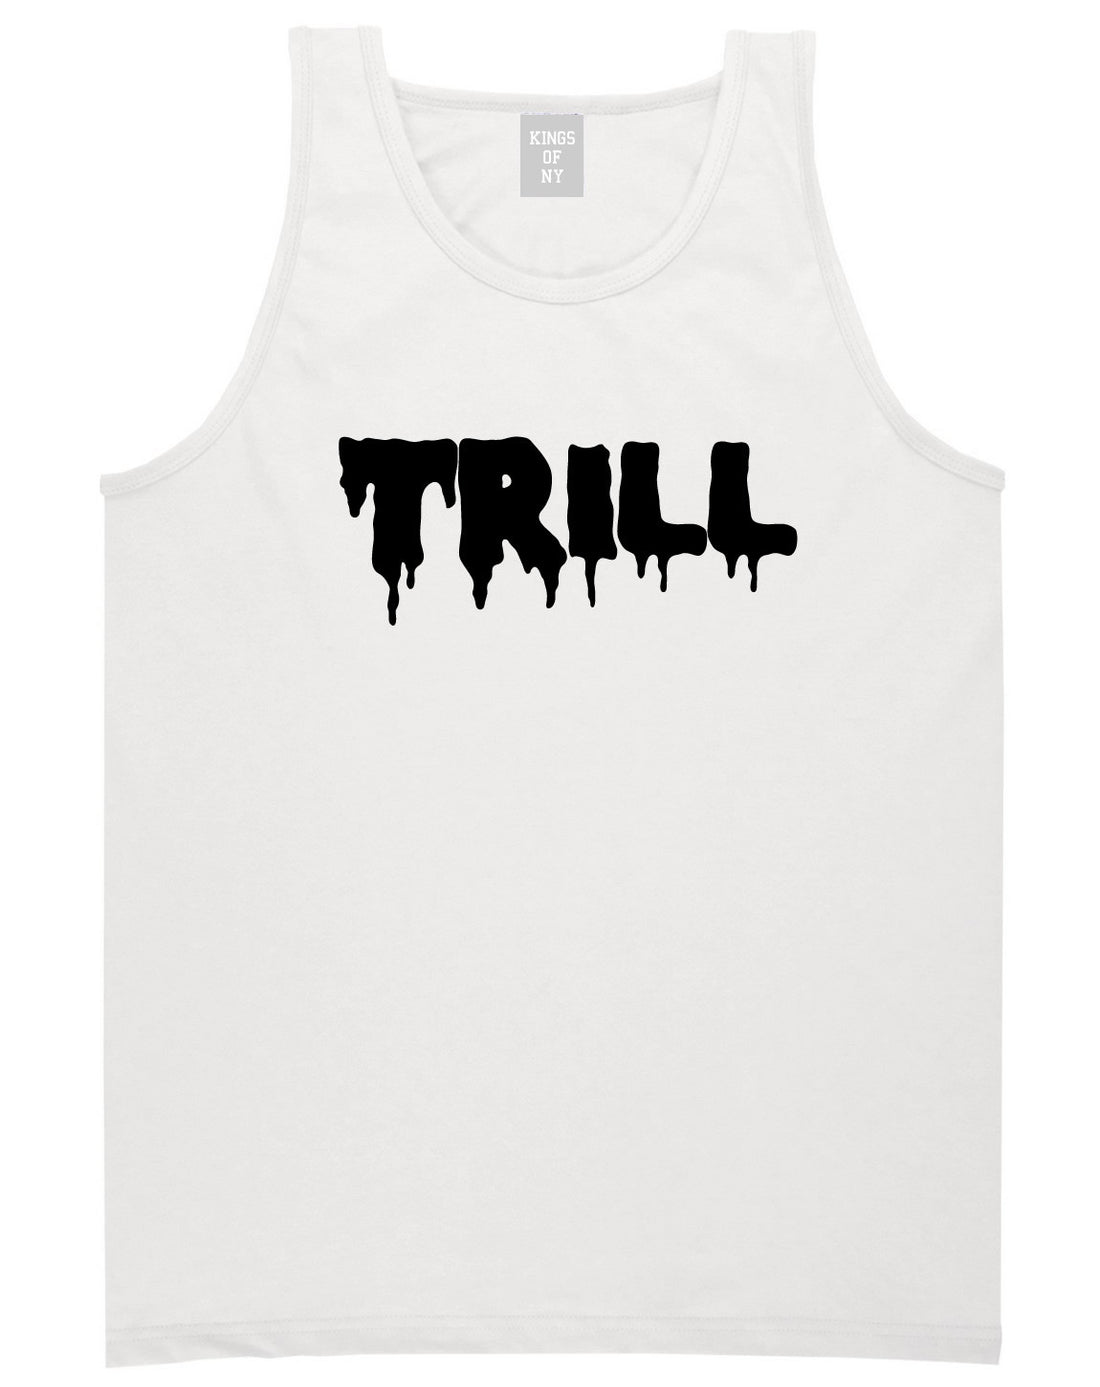 Trill Blood New York Bx Been Style Fashion Tank Top In White by Kings Of NY